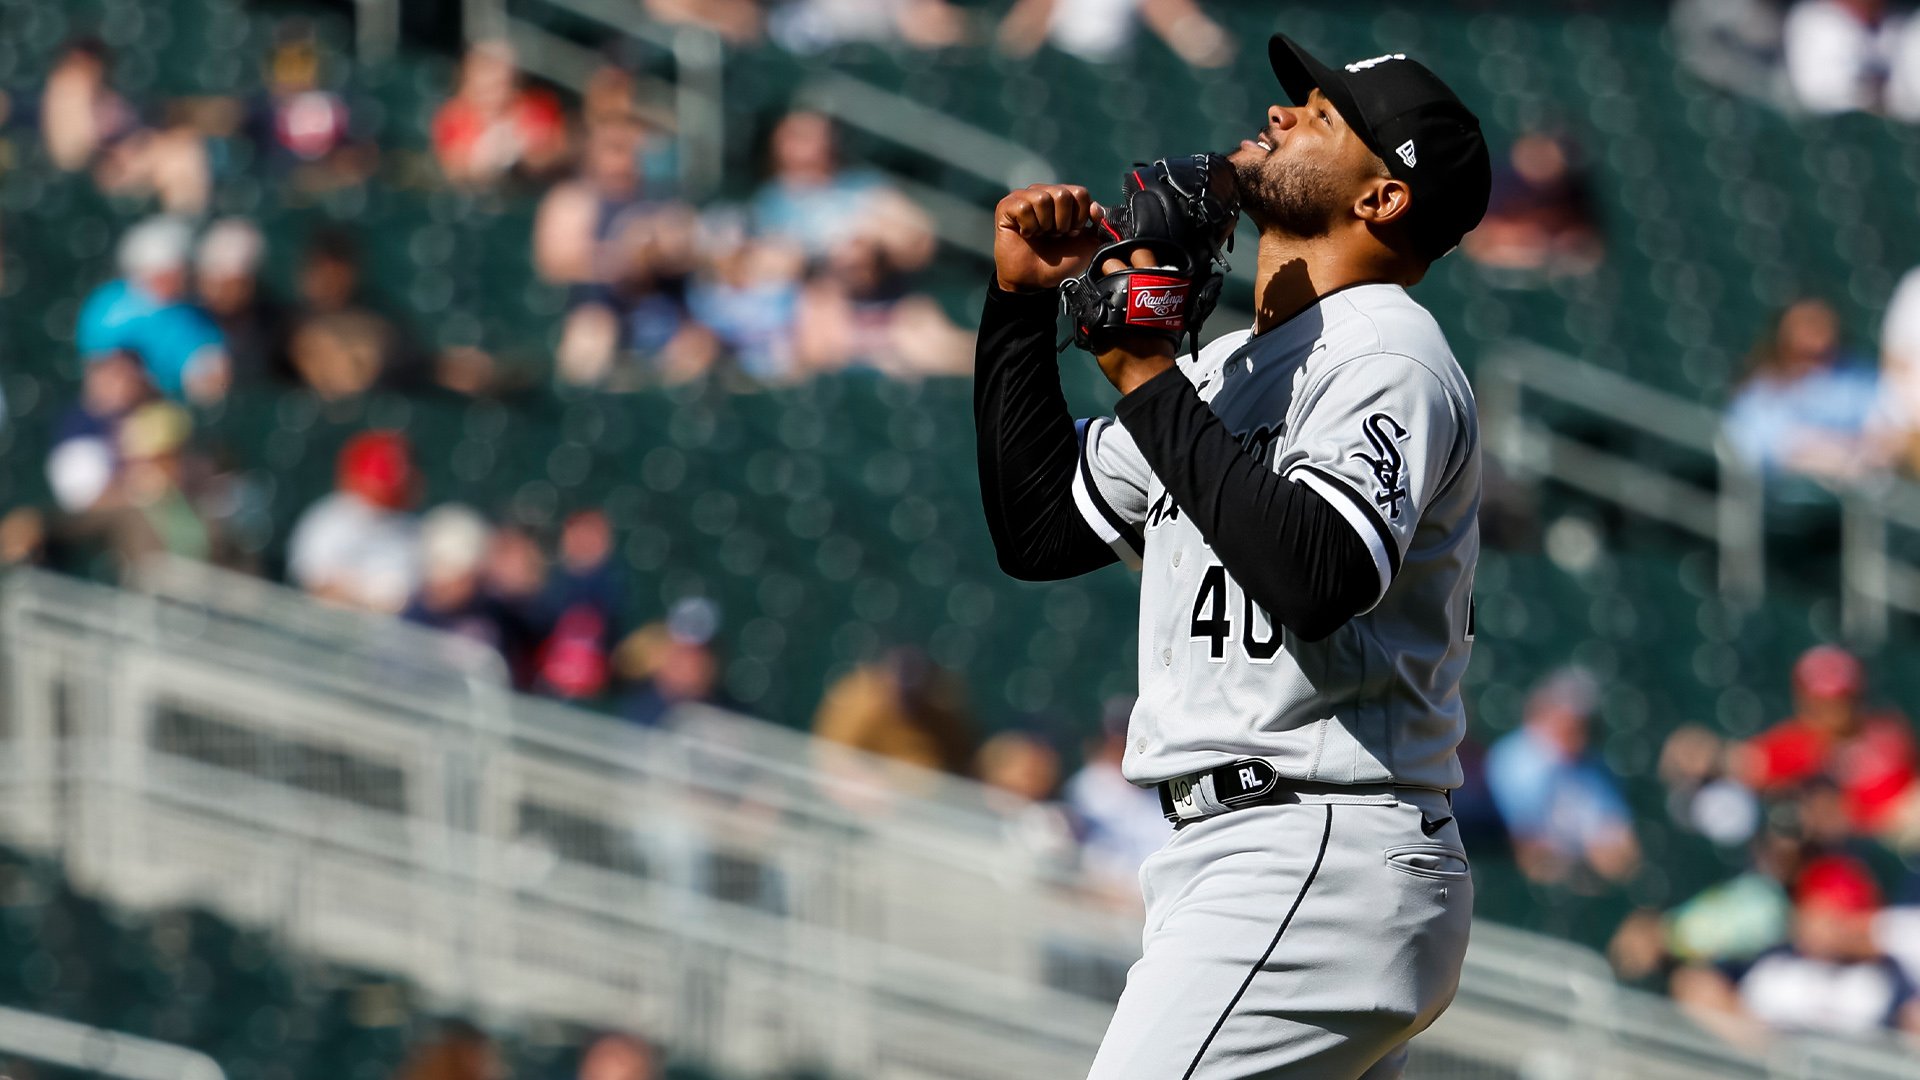 White Sox's Reynaldo Lopez Is Ready To Break Out In A Big Way